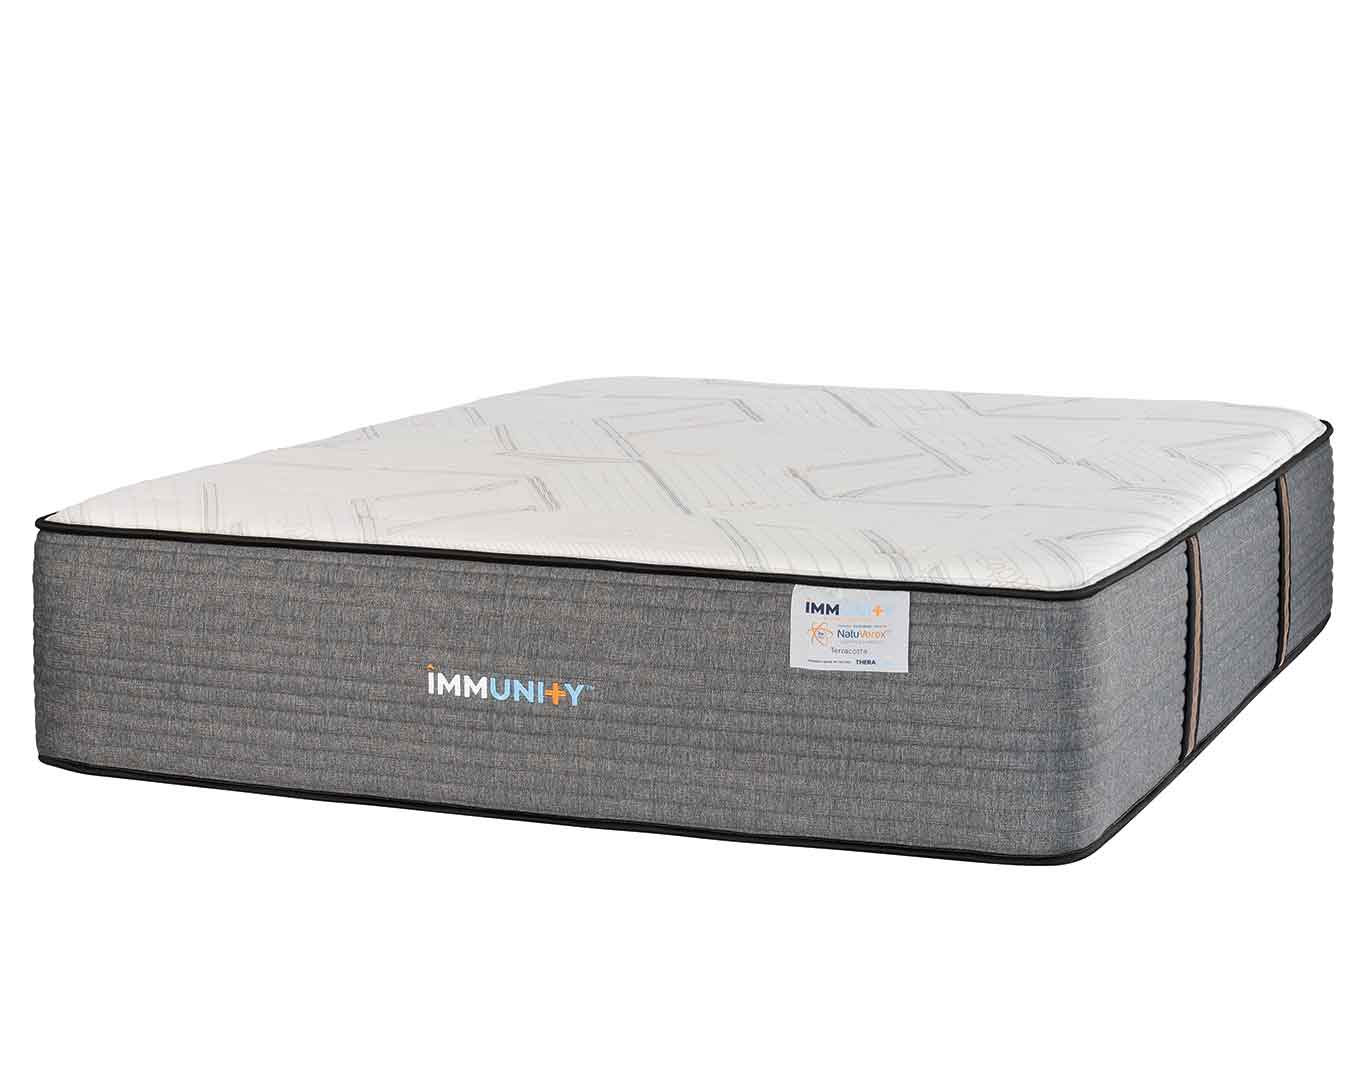 Immunity Terracotta copper mattress at an angle with a white background.